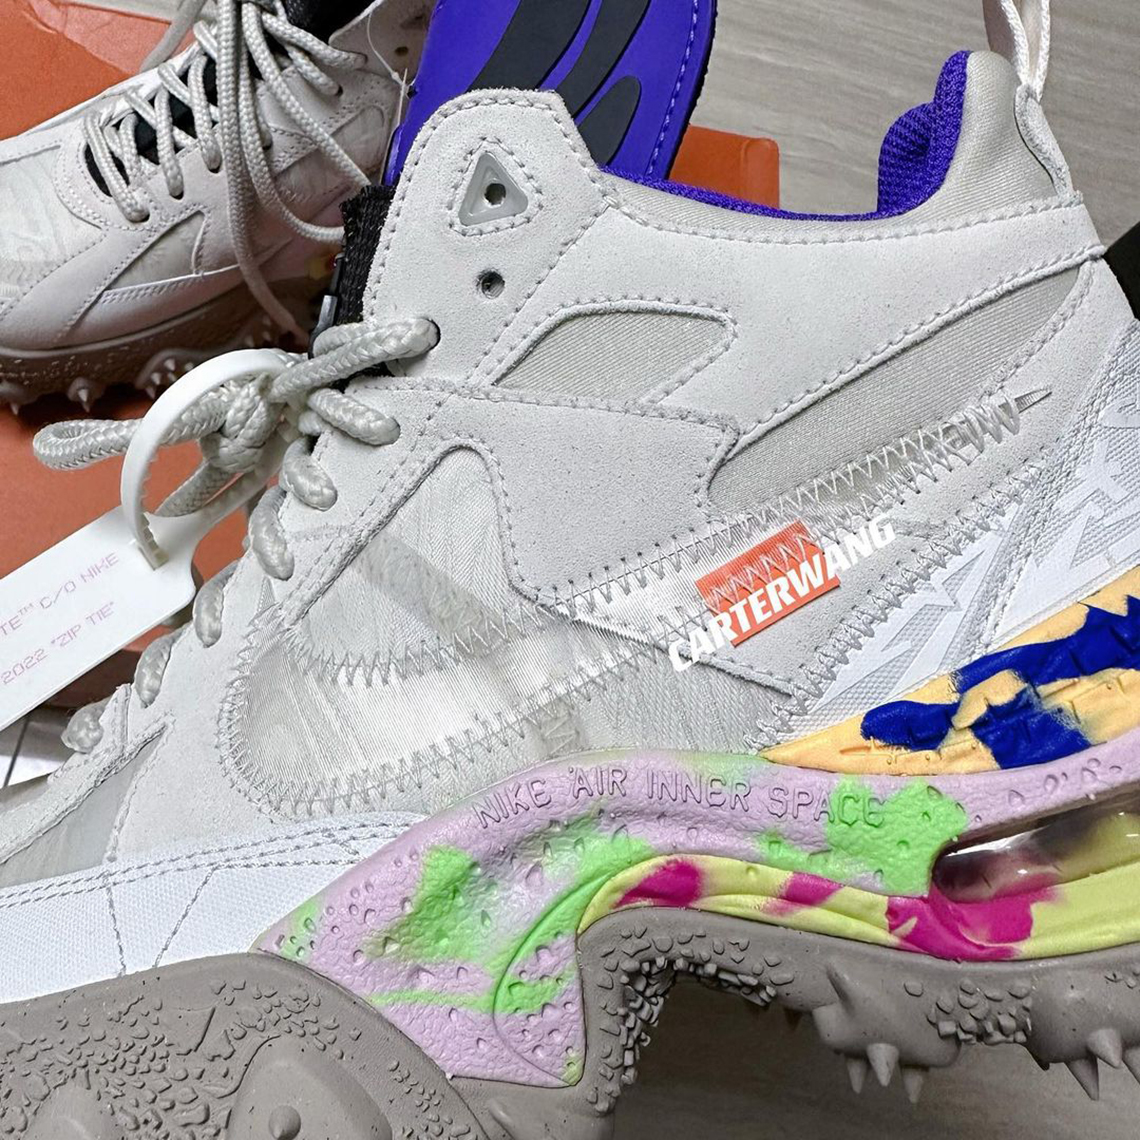 off-white-nike-air-terra-forma-first-look-sneakernews